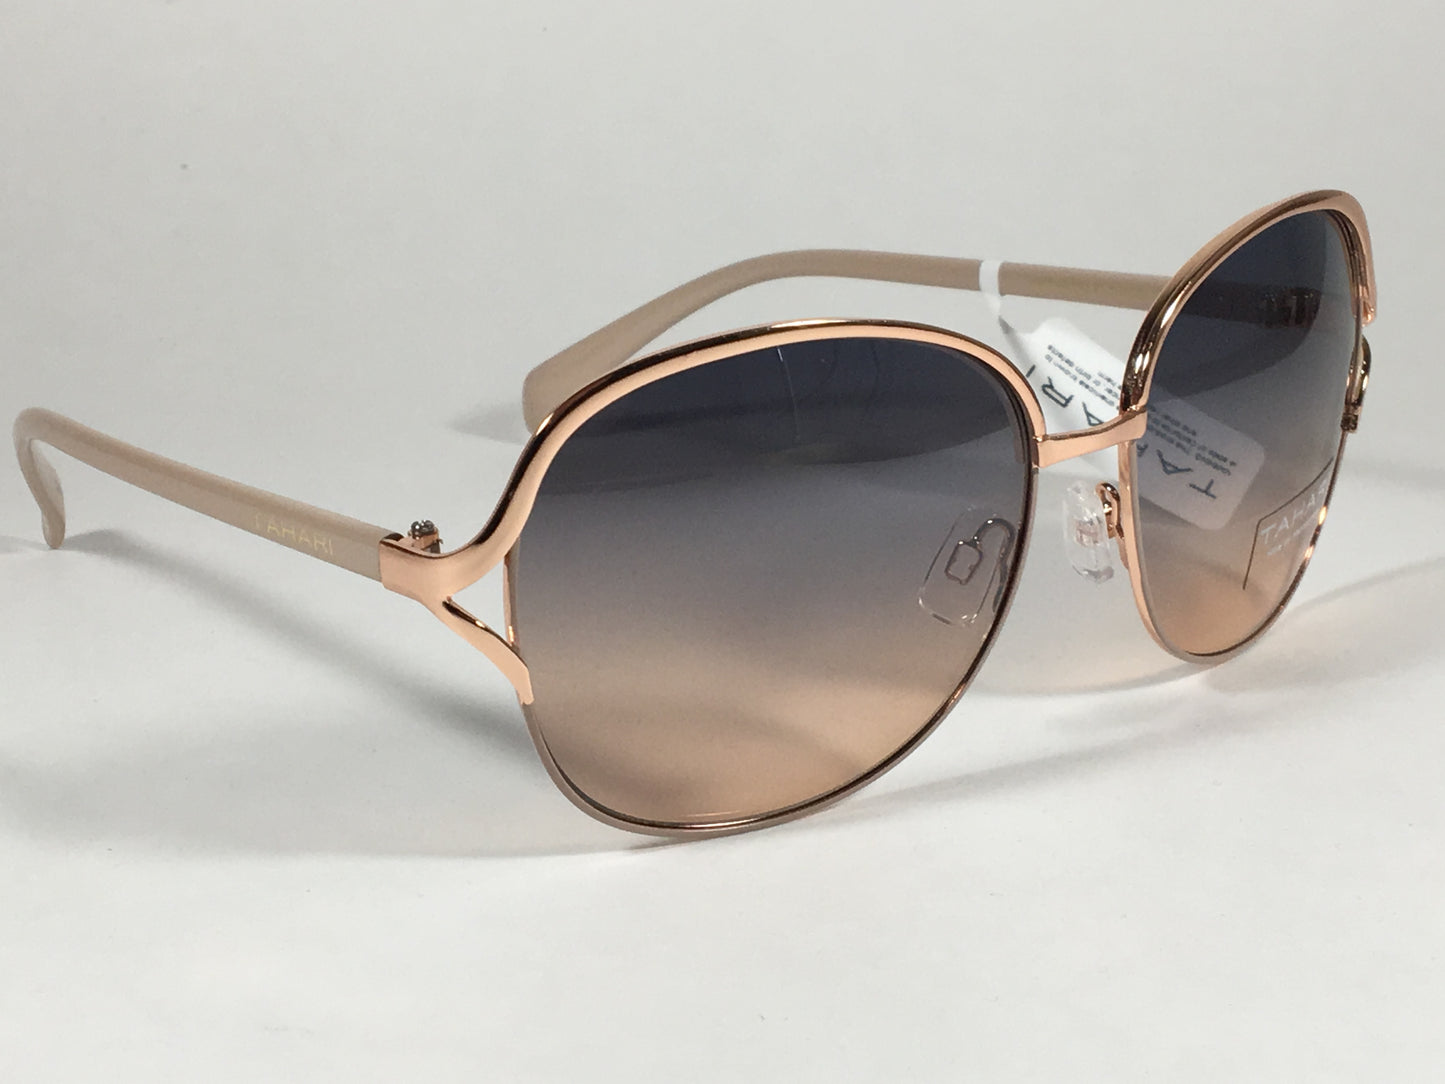 Tahari Butterfly Round Sunglasses Rose Gold Nude Blue Gradient Lens Th699 Ndrgd - Sunglasses